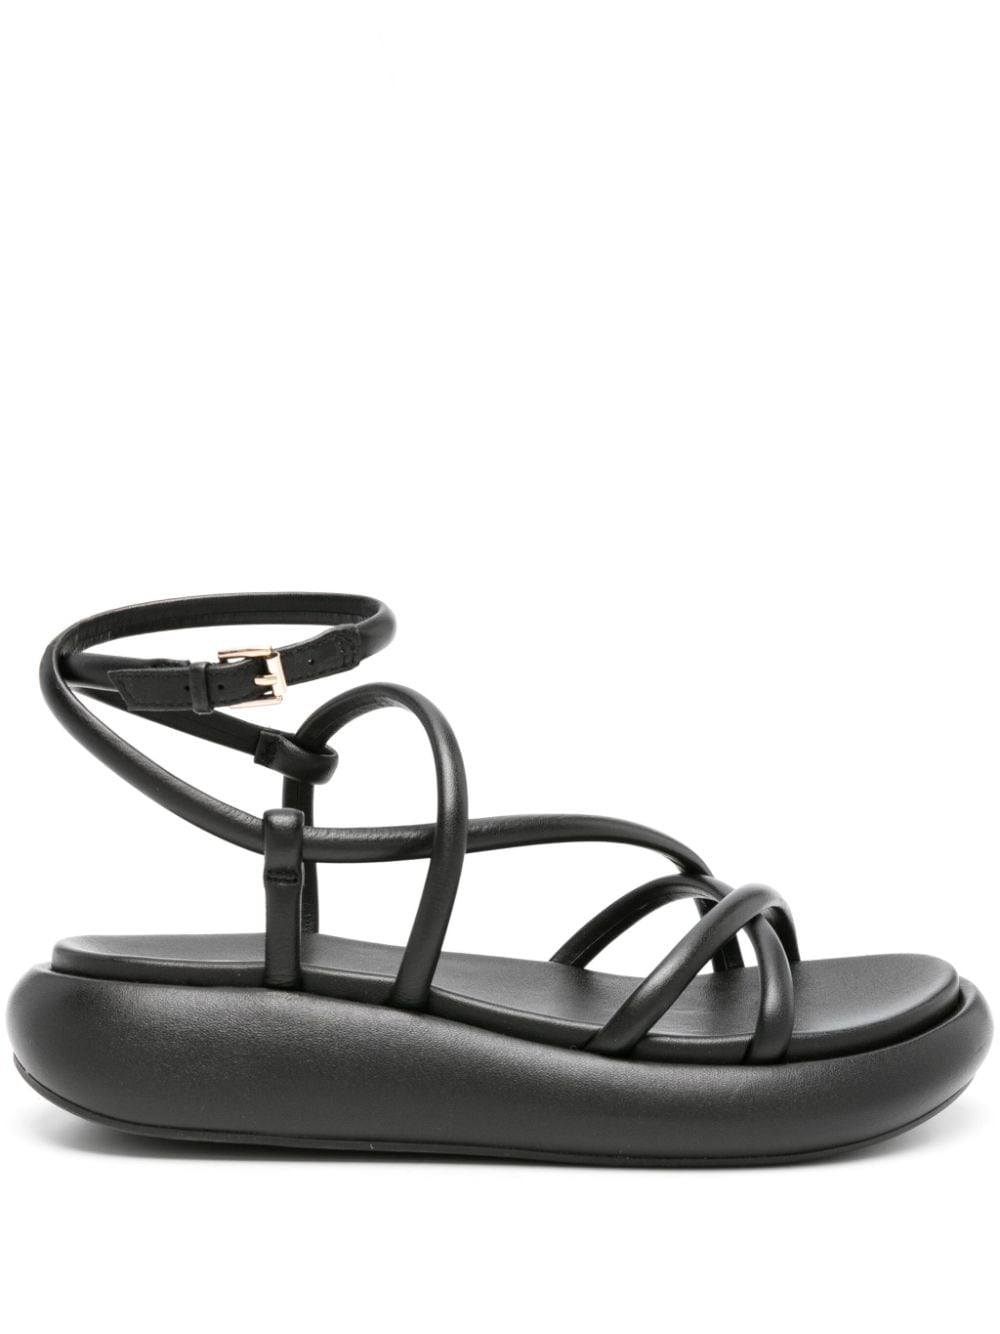 Vice leather sandals<BR/><BR/><BR/>